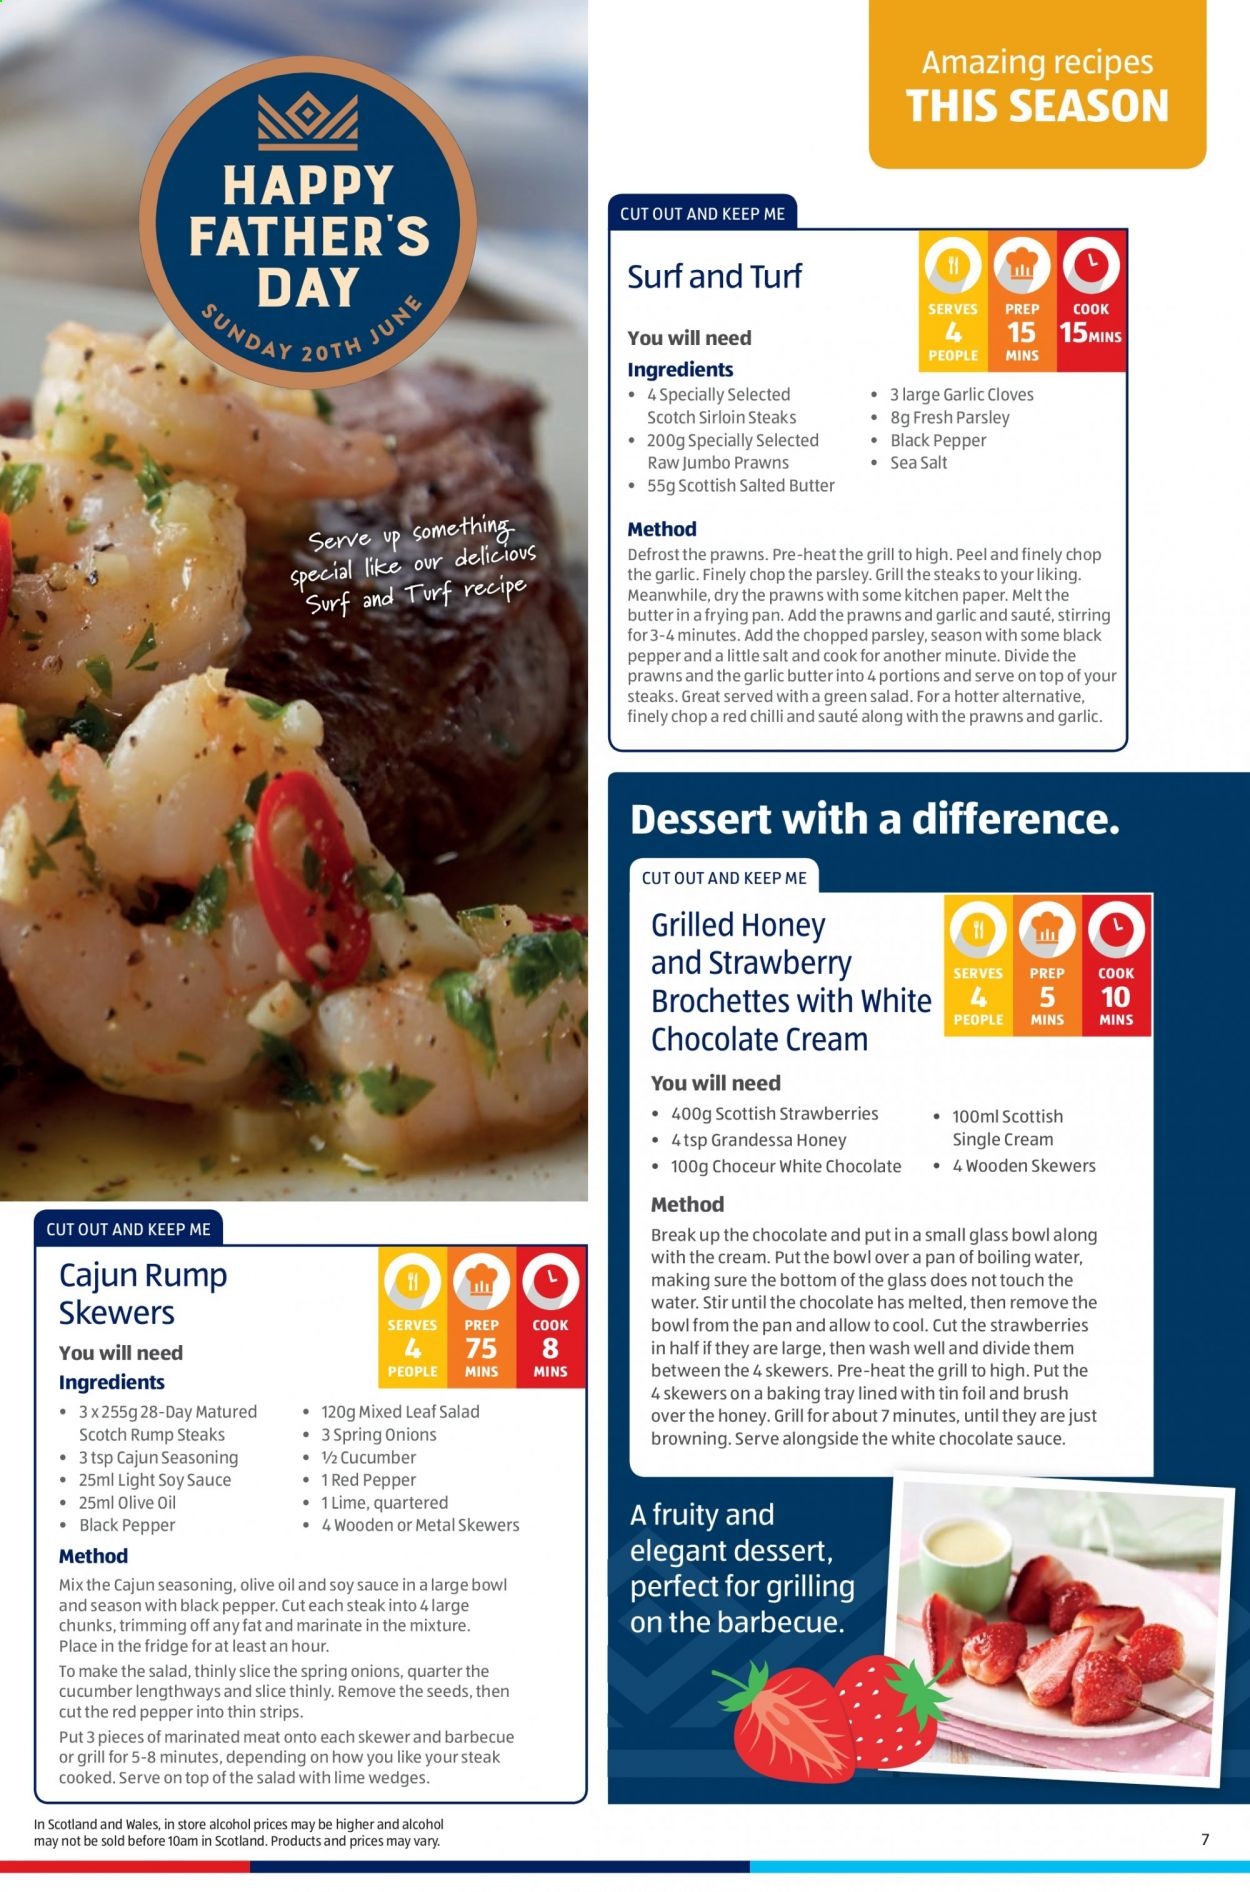 thumbnail - Aldi offer  - 20/06/2021 - 27/06/2021 - Sales products - alcohol, parsley, strawberries, steak, sirloin steak, prawns, salted butter, strips, white chocolate, cloves, spice, soy sauce, olive oil, honey, Surf, Sure, brush, pan, baking tray, glass bowl, paper. Page 7.